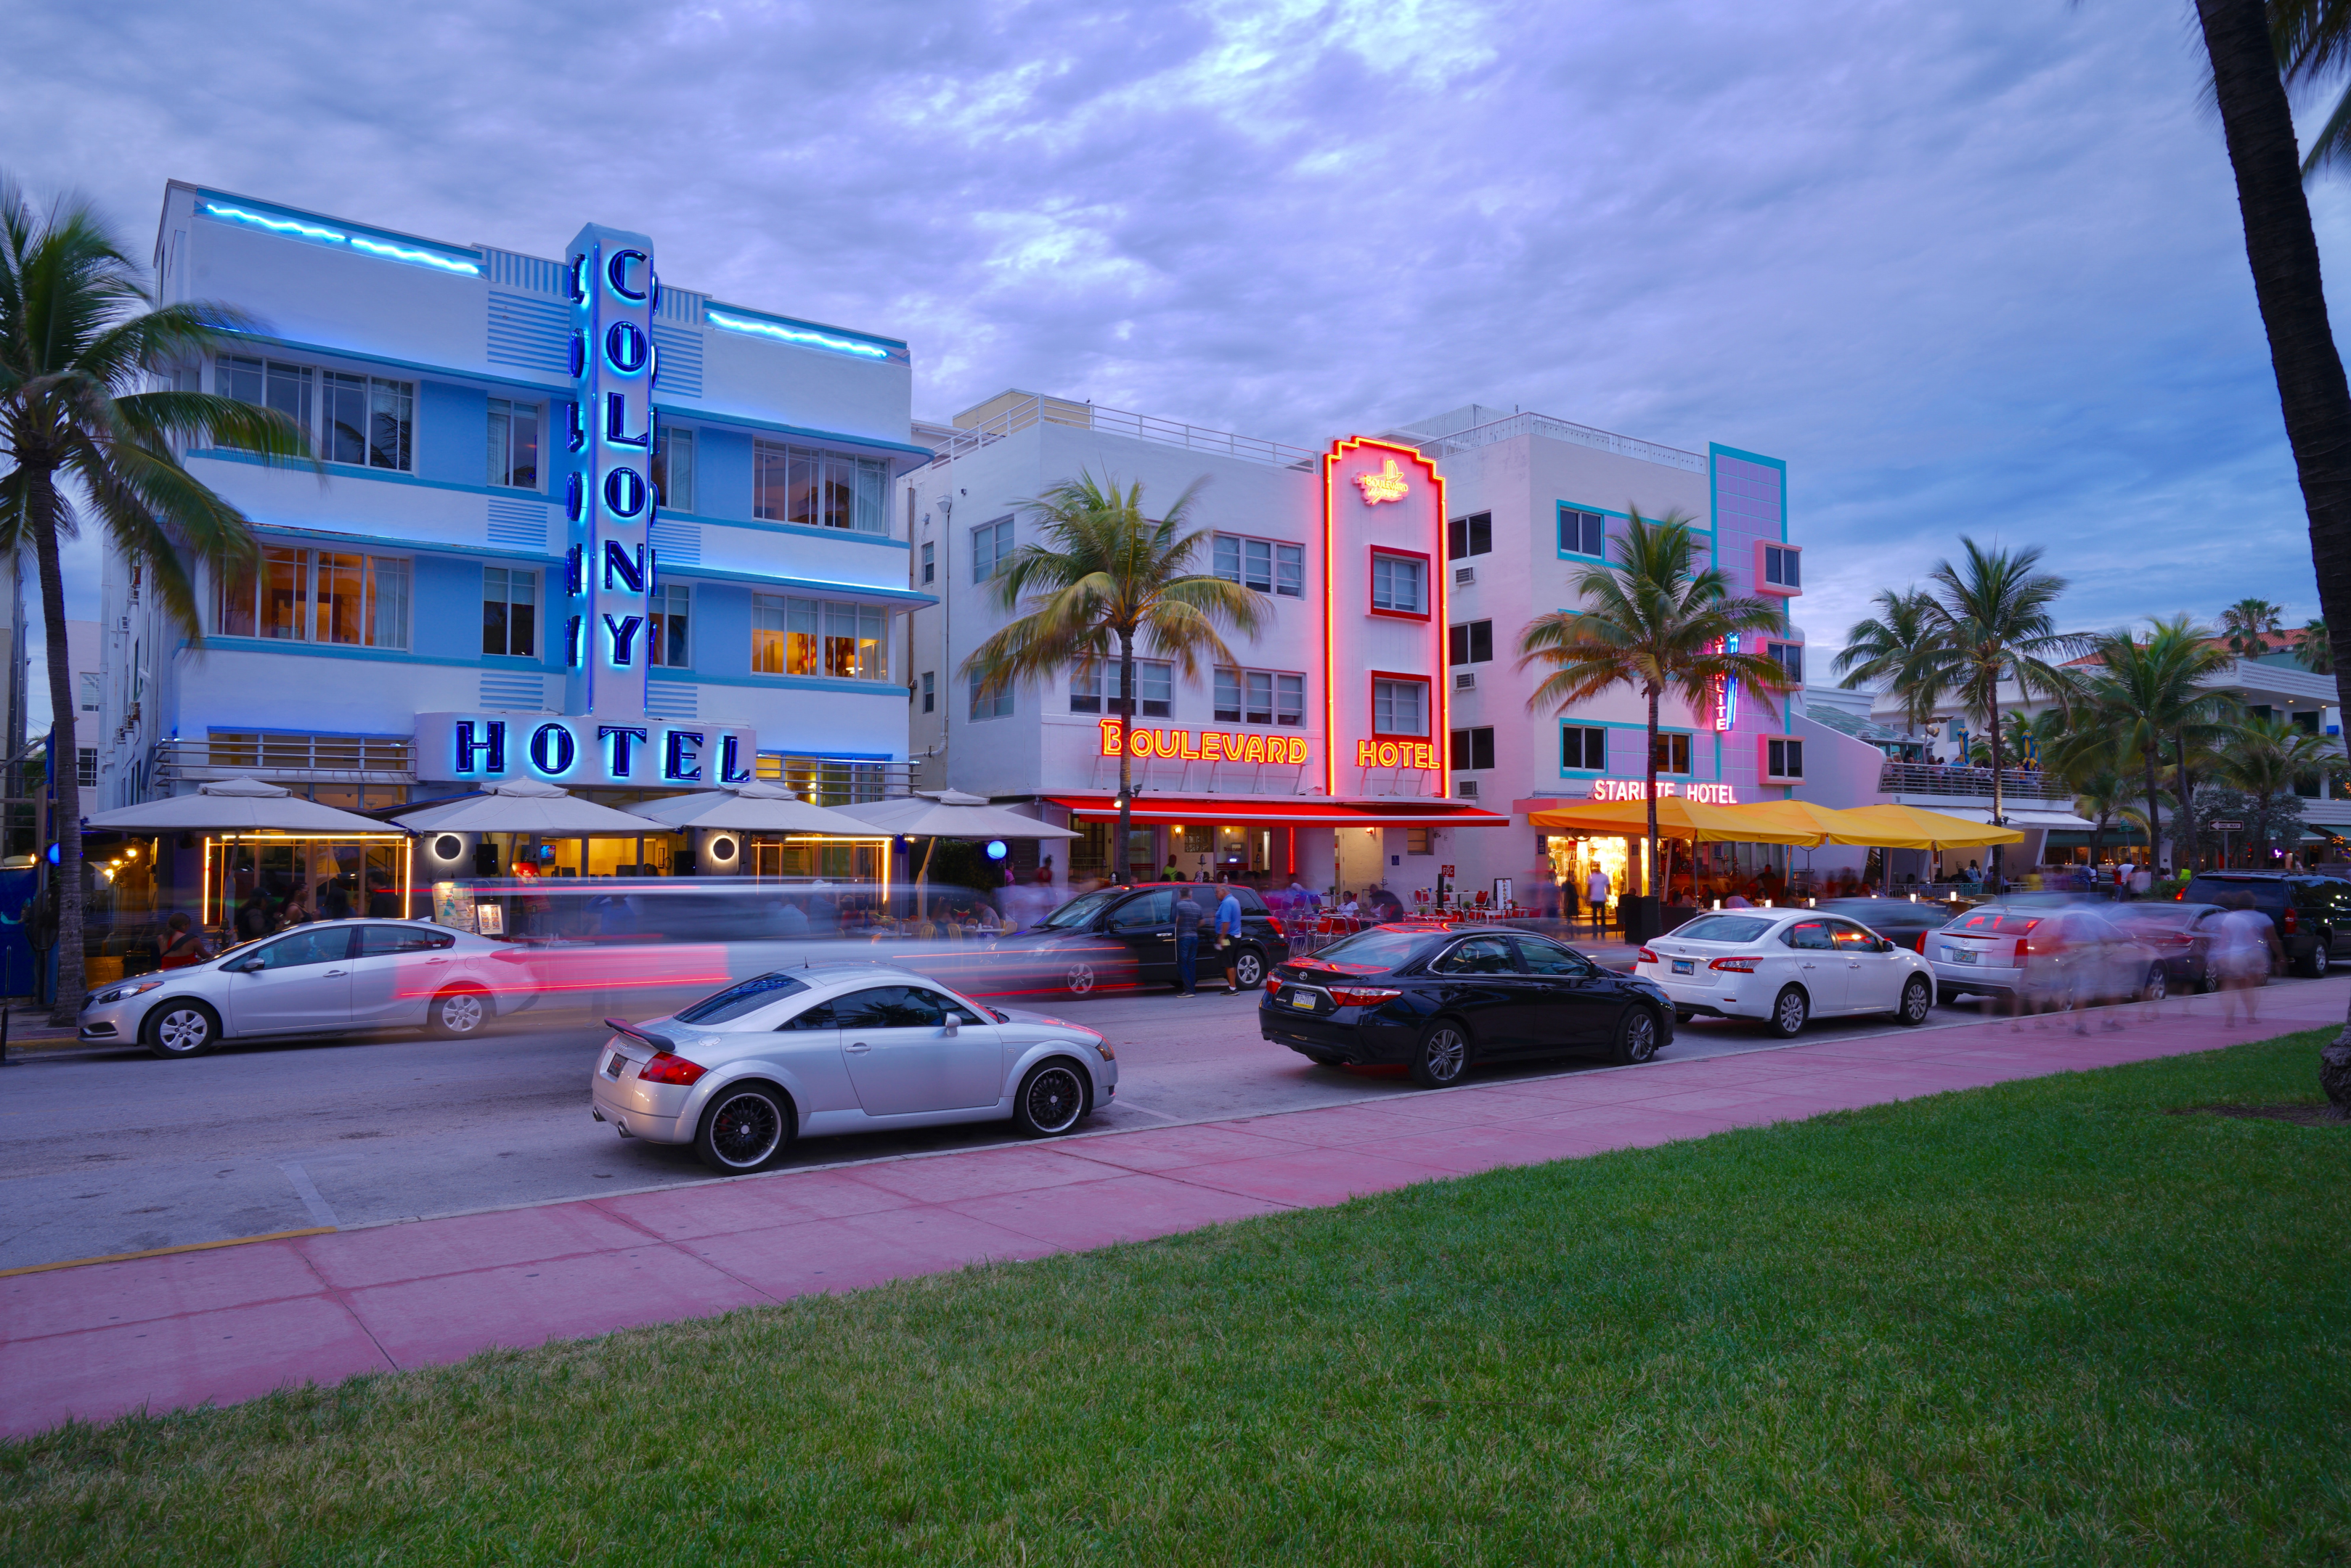 Hotels in Miami, Florida near the cruise port